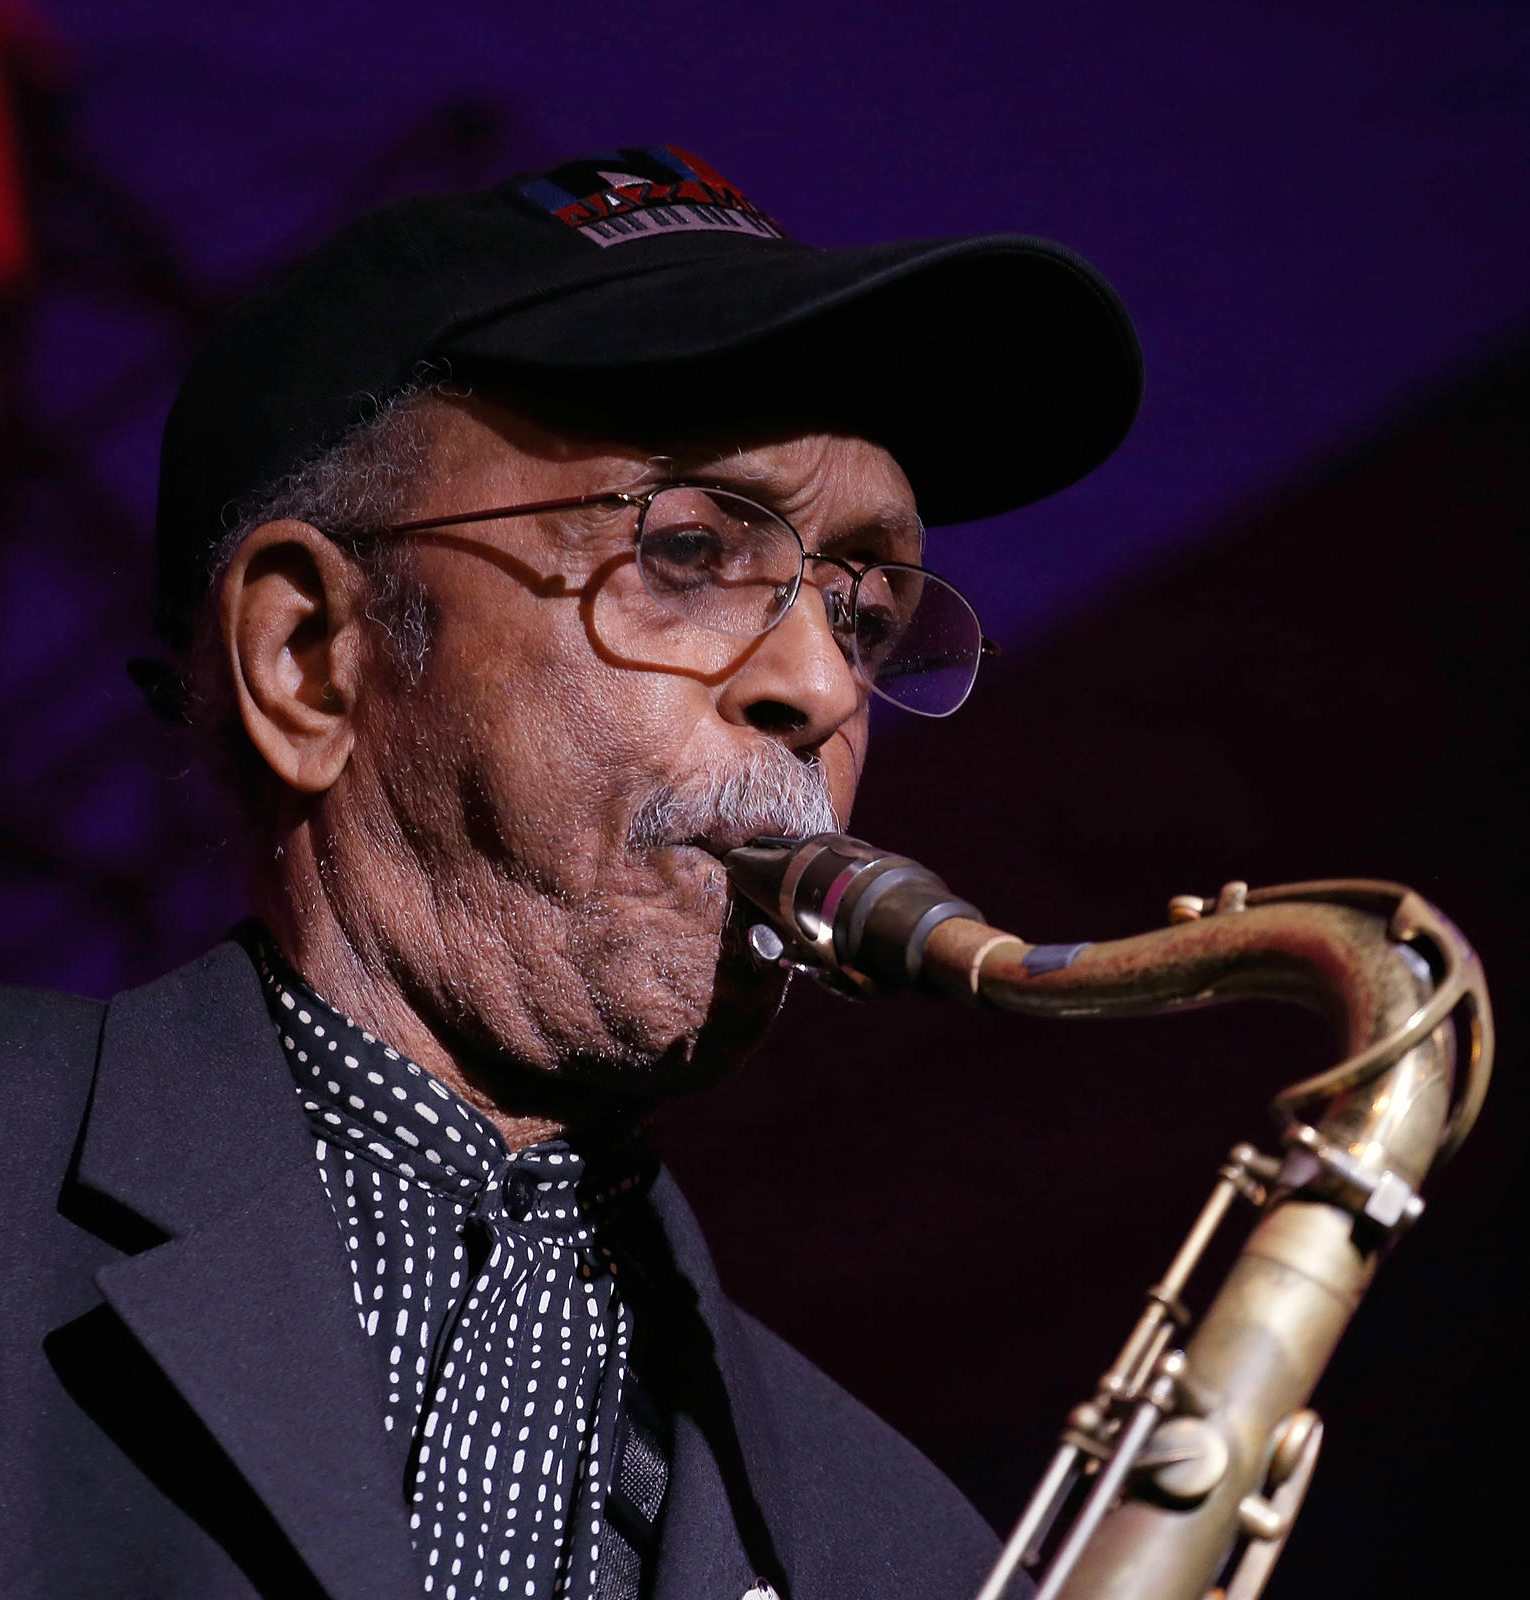 NEW YORK, NEW YORK - MARCH 30:  Saxophonist Jimmy Heath performs during the Apollo Walk of Fame Induction Ceremony for Charlie "Yardbird" Parker at The Apollo Theater on March 30, 2016 in New York City.  (Photo by John Lamparski/WireImage)